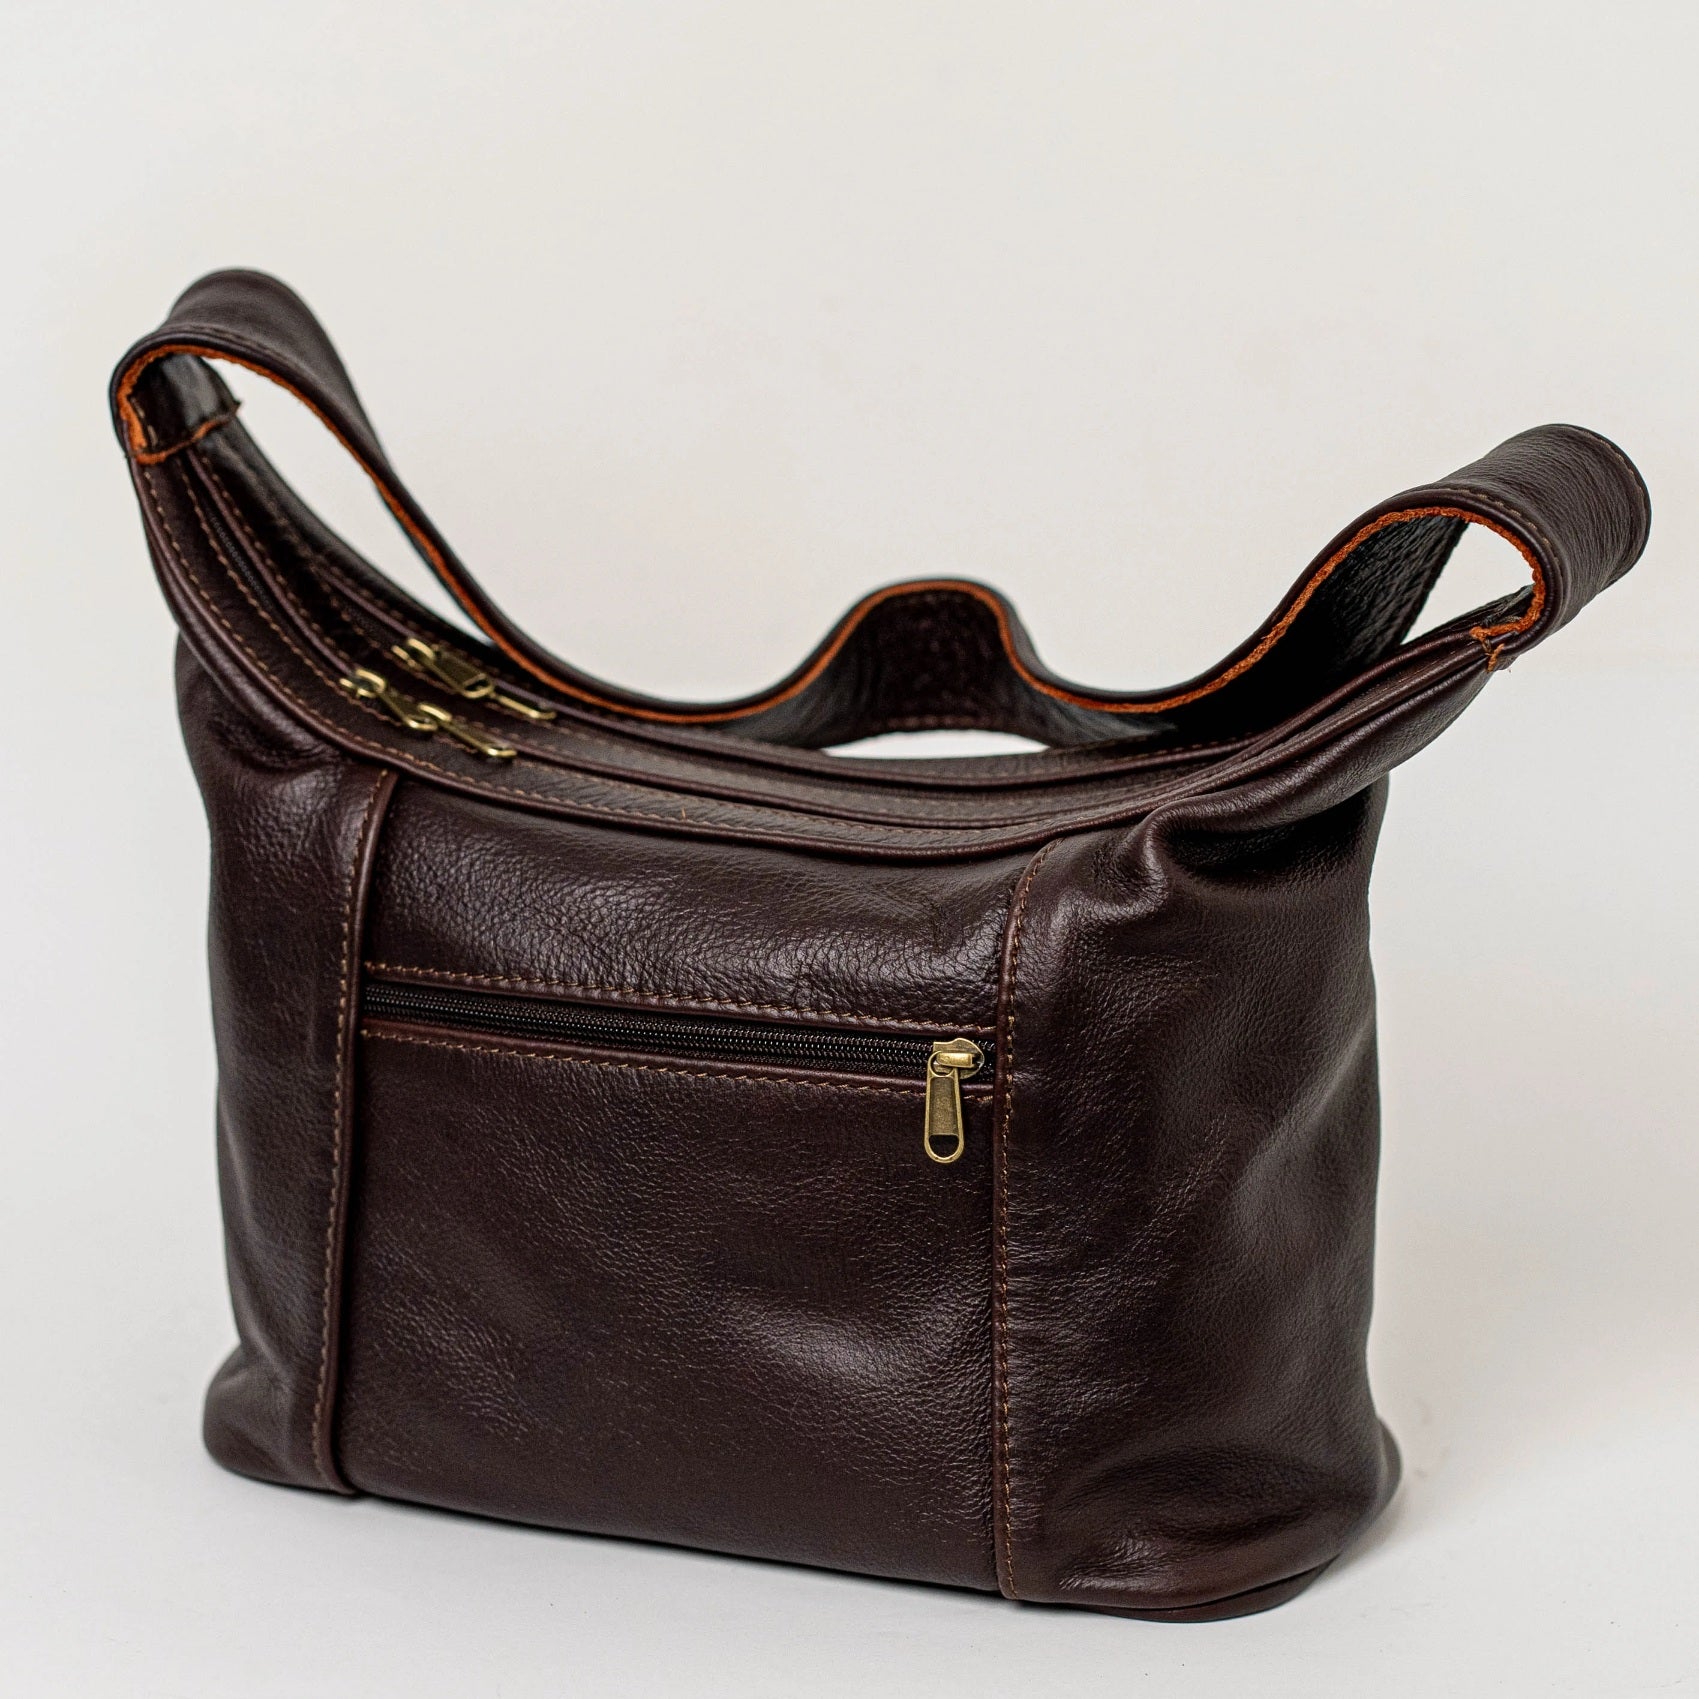 Gb7 leather bags in dark tan made by cape Masai Leather